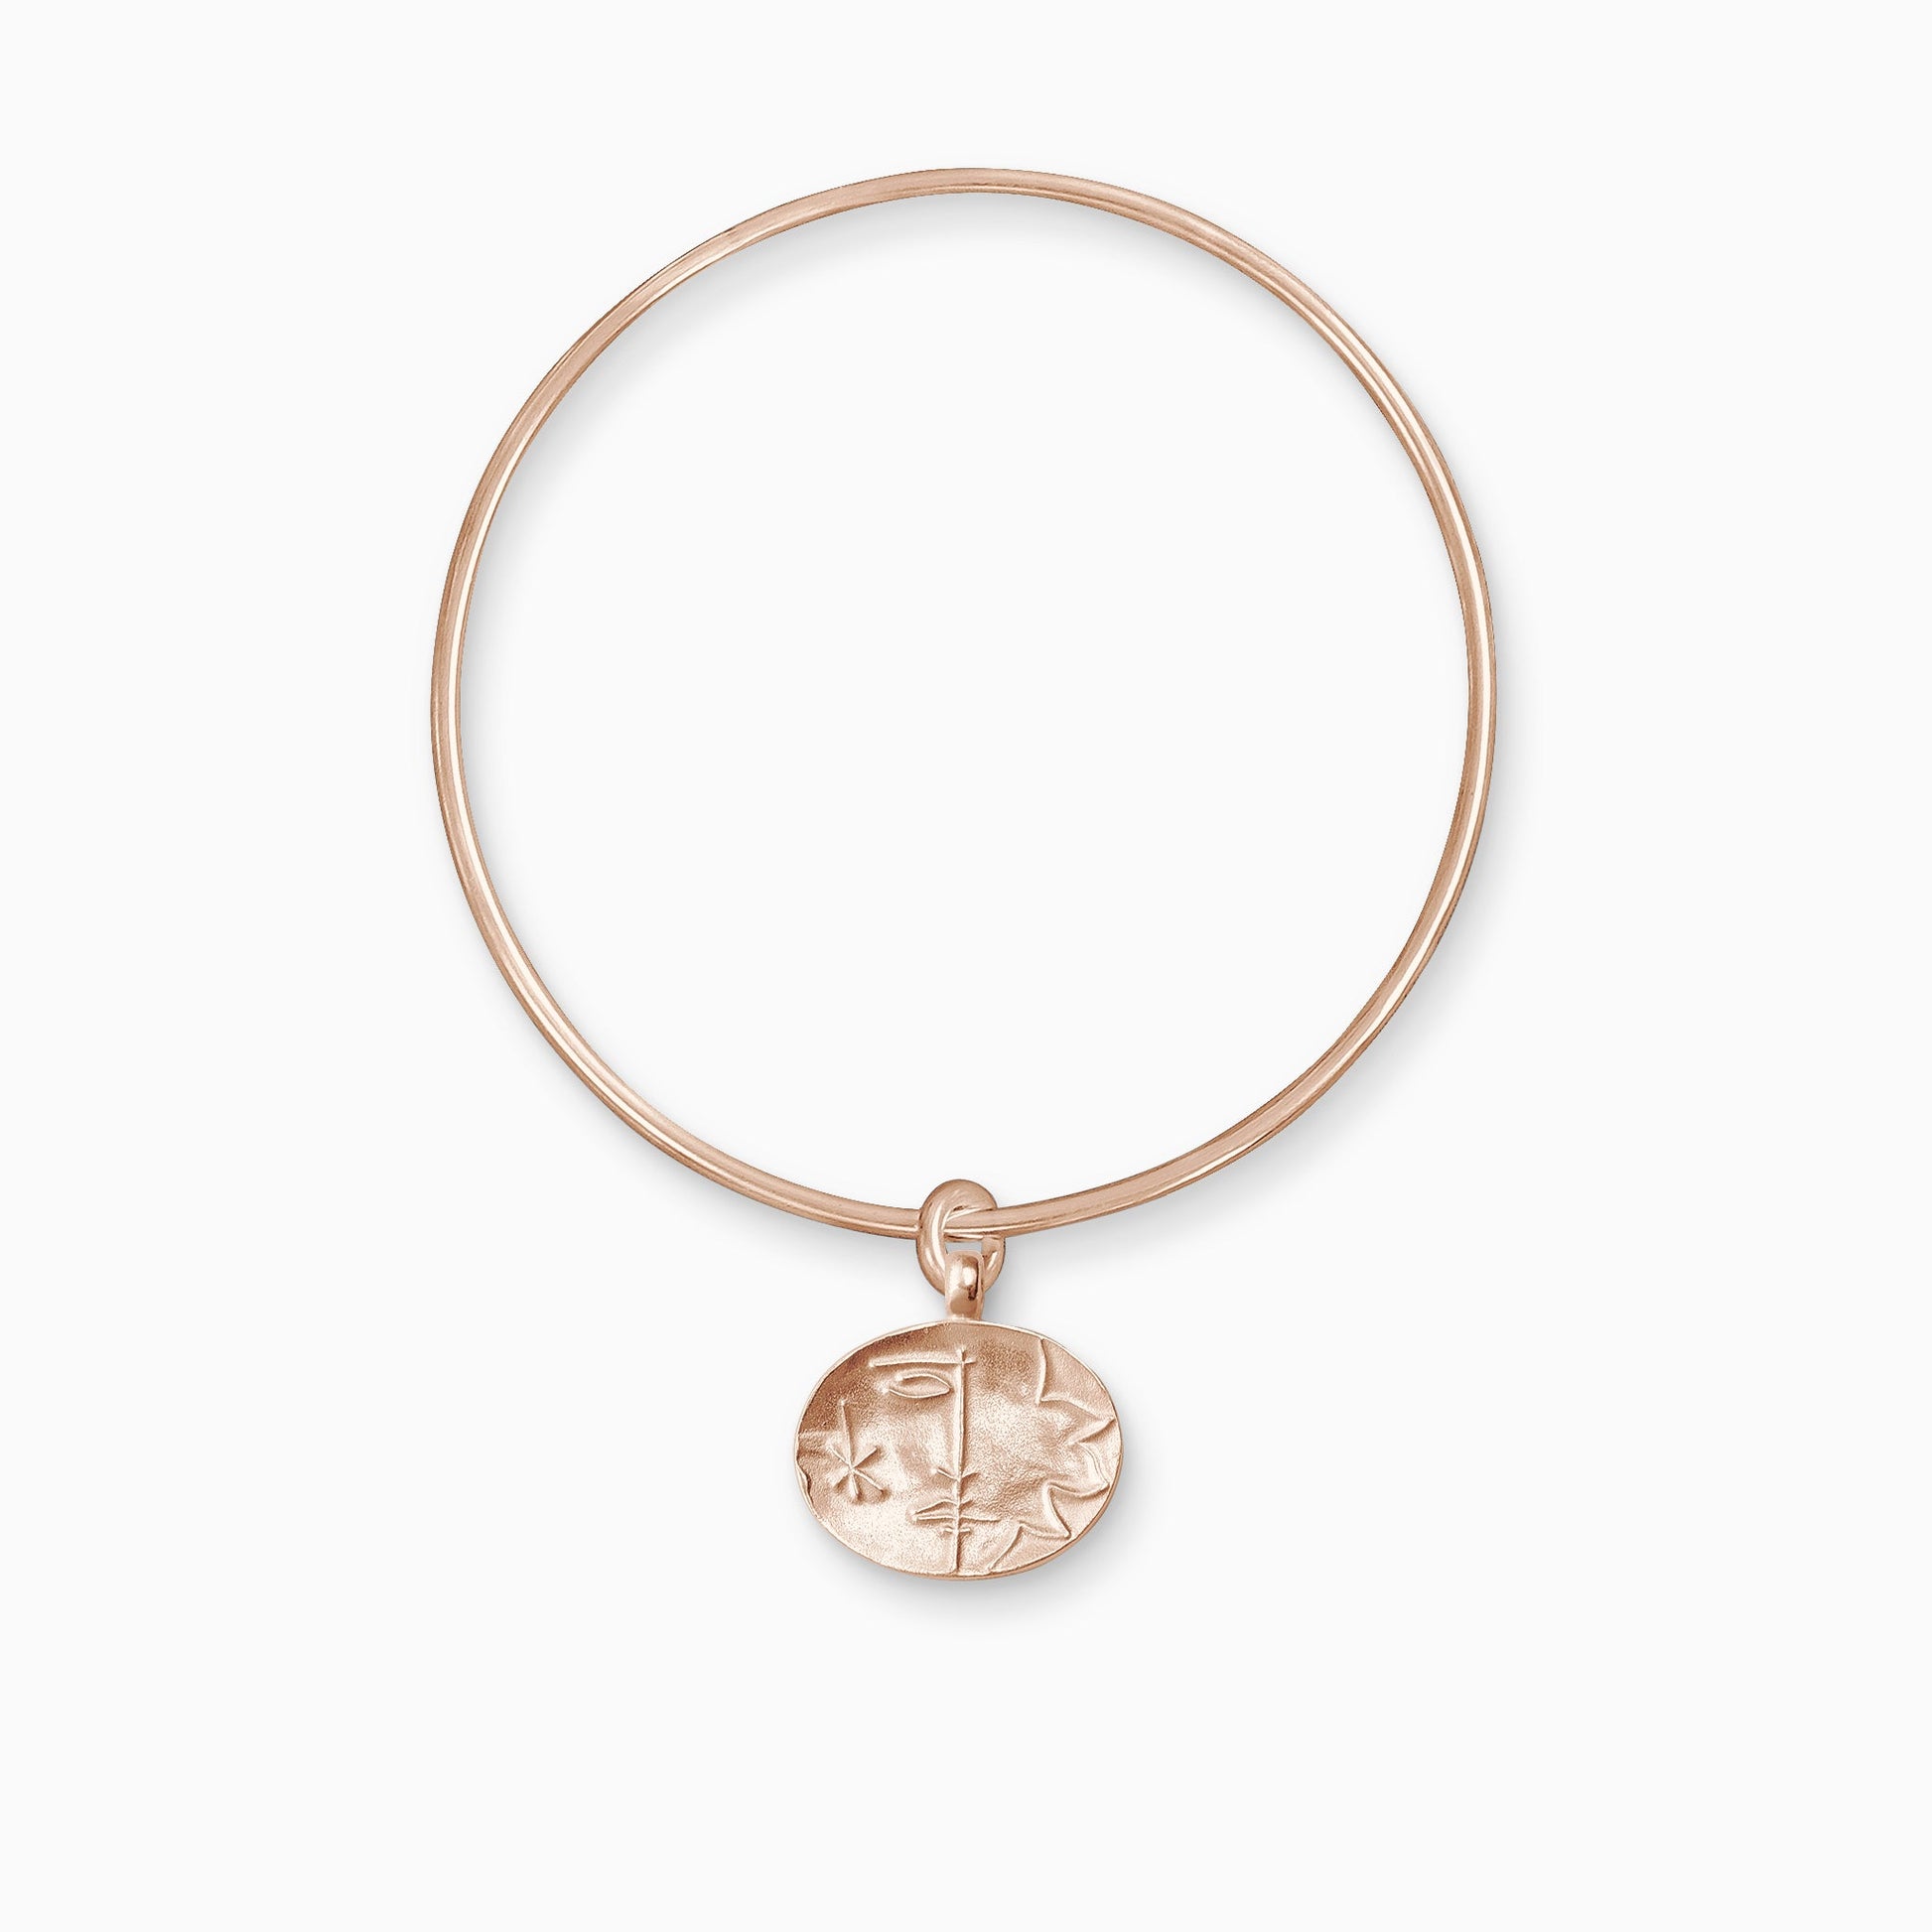 An 18ct Fairtrade rose gold oval shaped charm with raised image of a Sun on one side and a Moon on the other, freely moving on a round wire bangle.  Charm 16mm x 20mm. Bangle 63mm inside diameter x 2mm round wire.